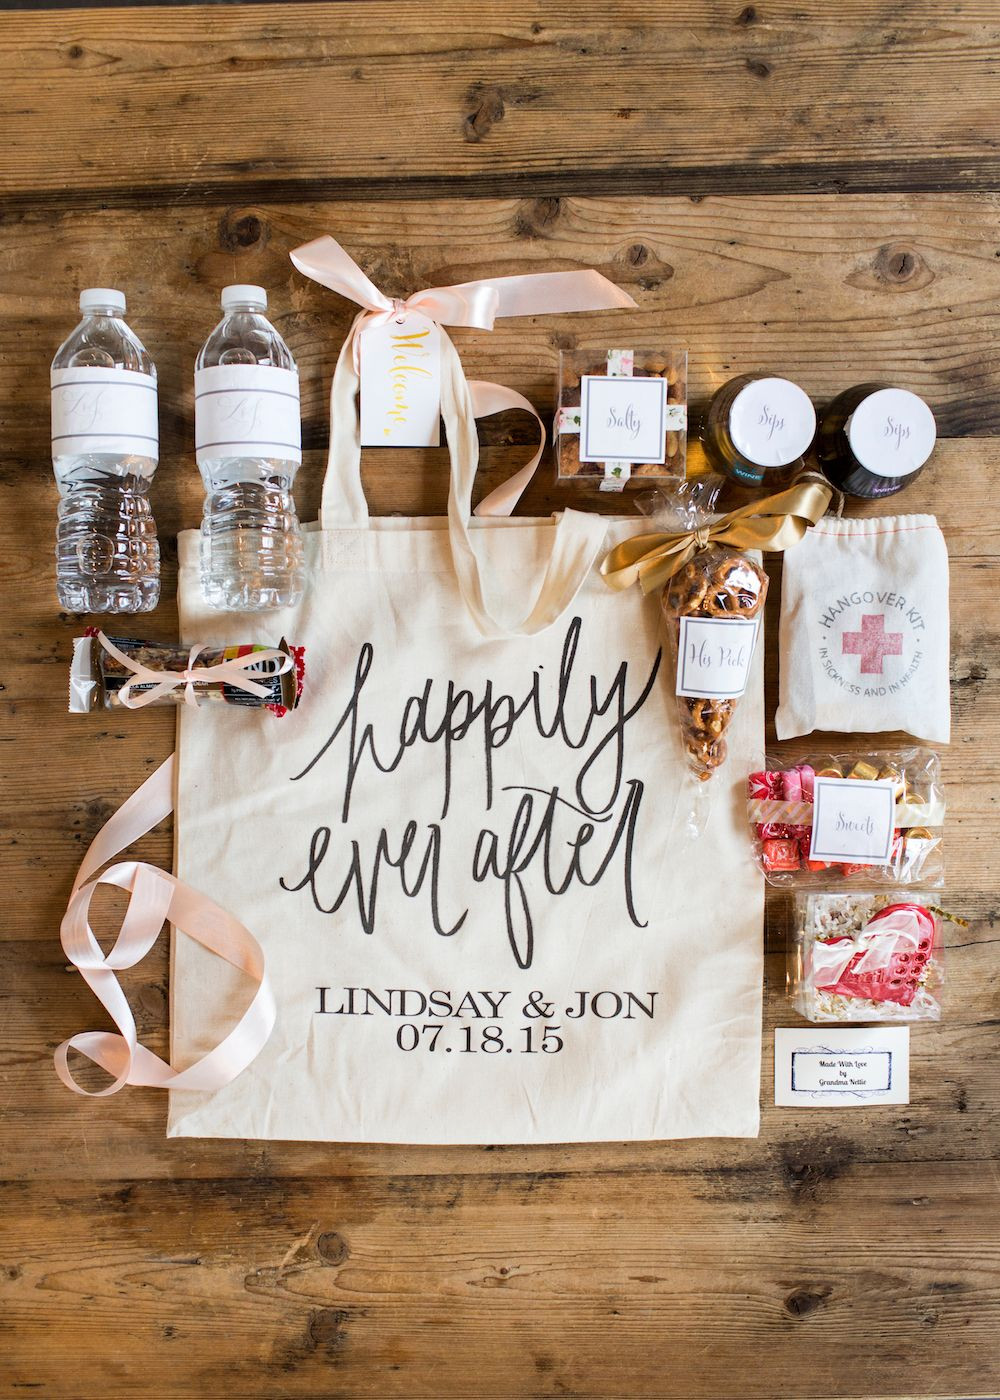 Gift Bag Ideas For Wedding Hotel Guests
 Wedding Wednesday What We Put in Our Wedding Wel e Bags